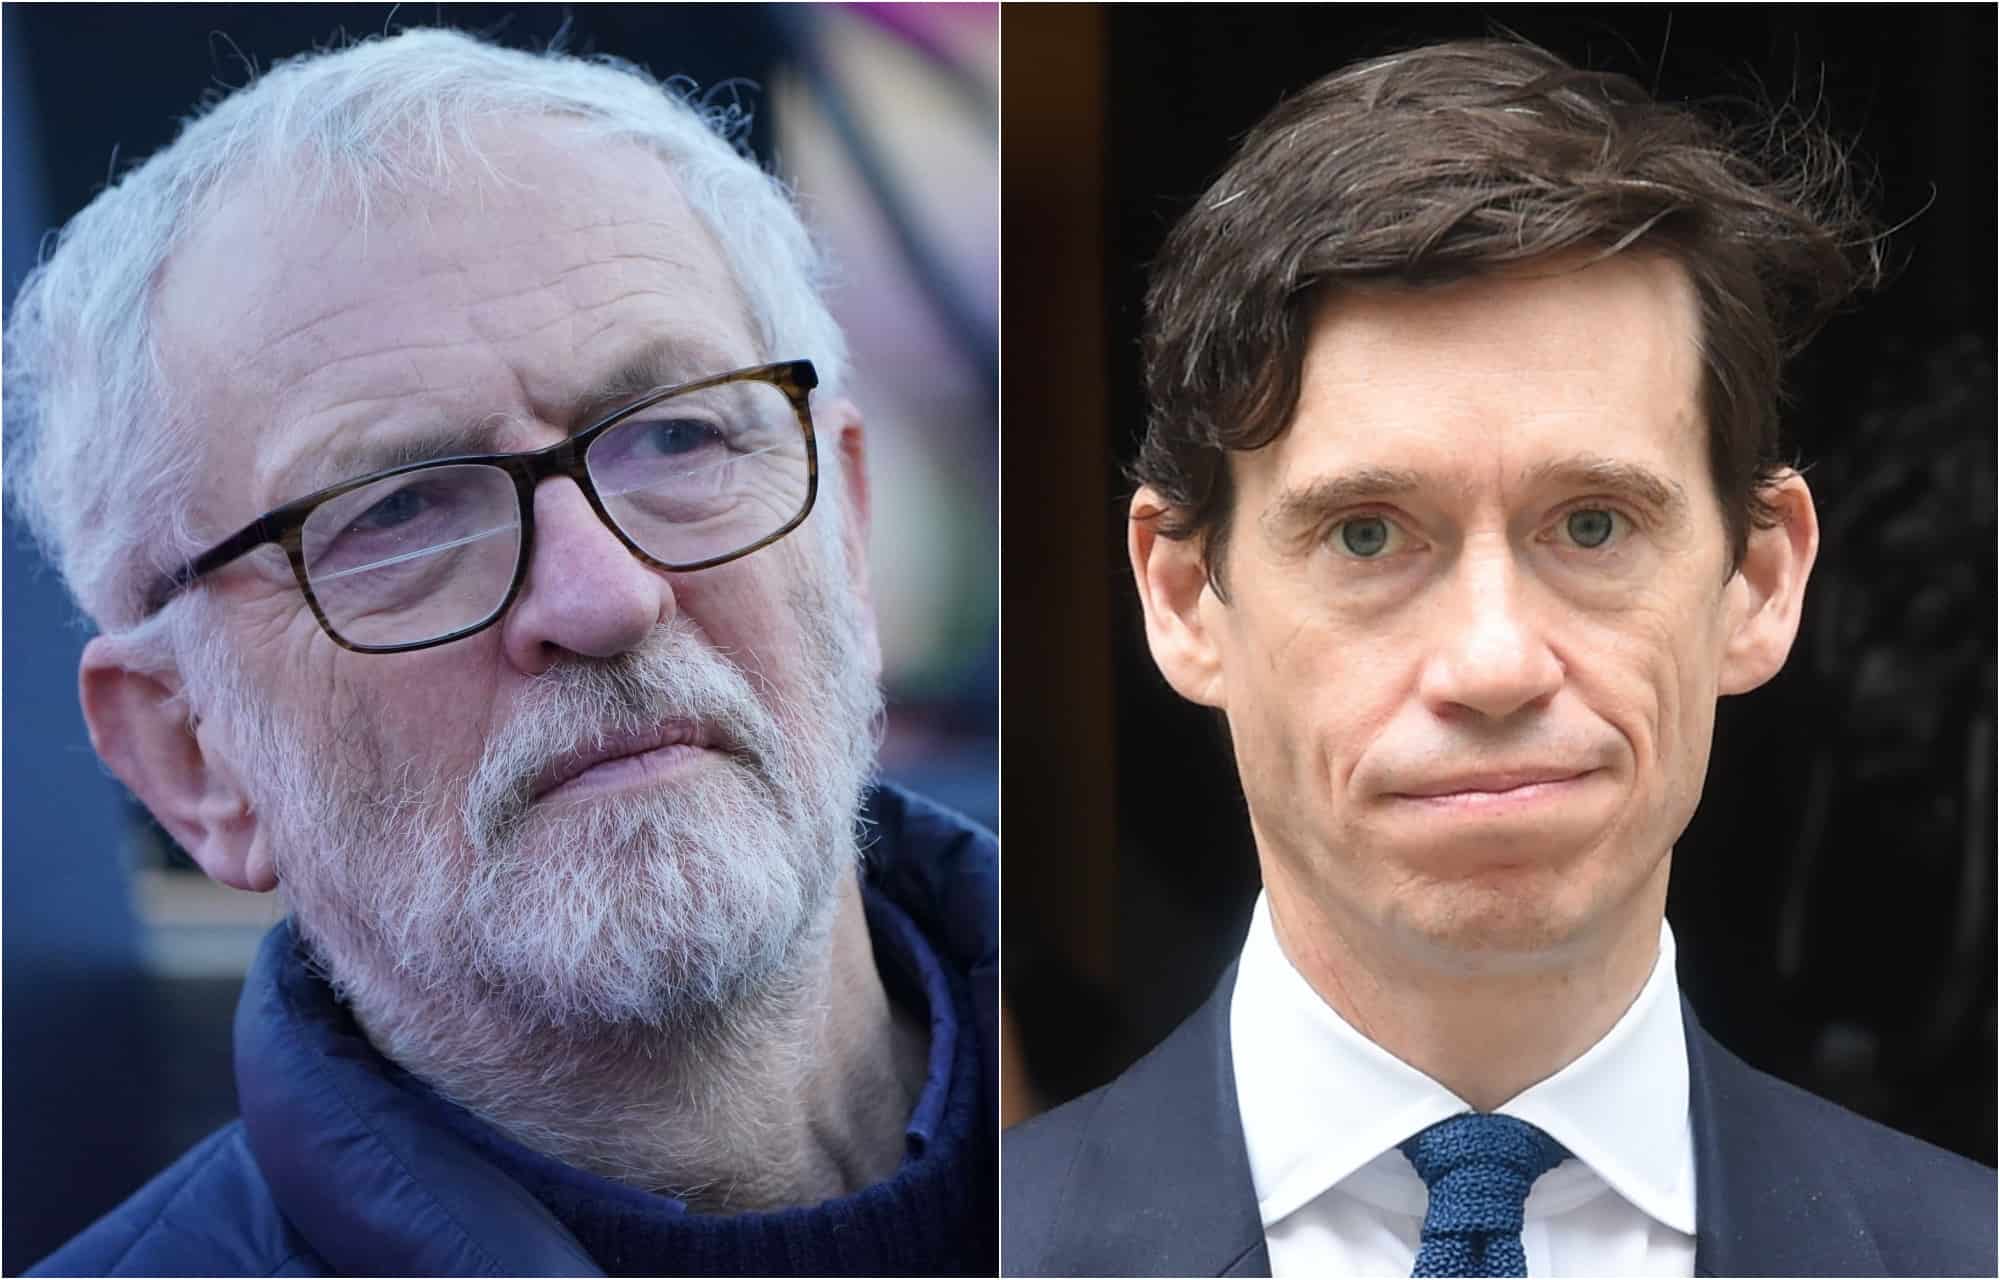 Rory Stewart says it is ‘disgusting’ that Corbyn was thrown out of the Labour Party